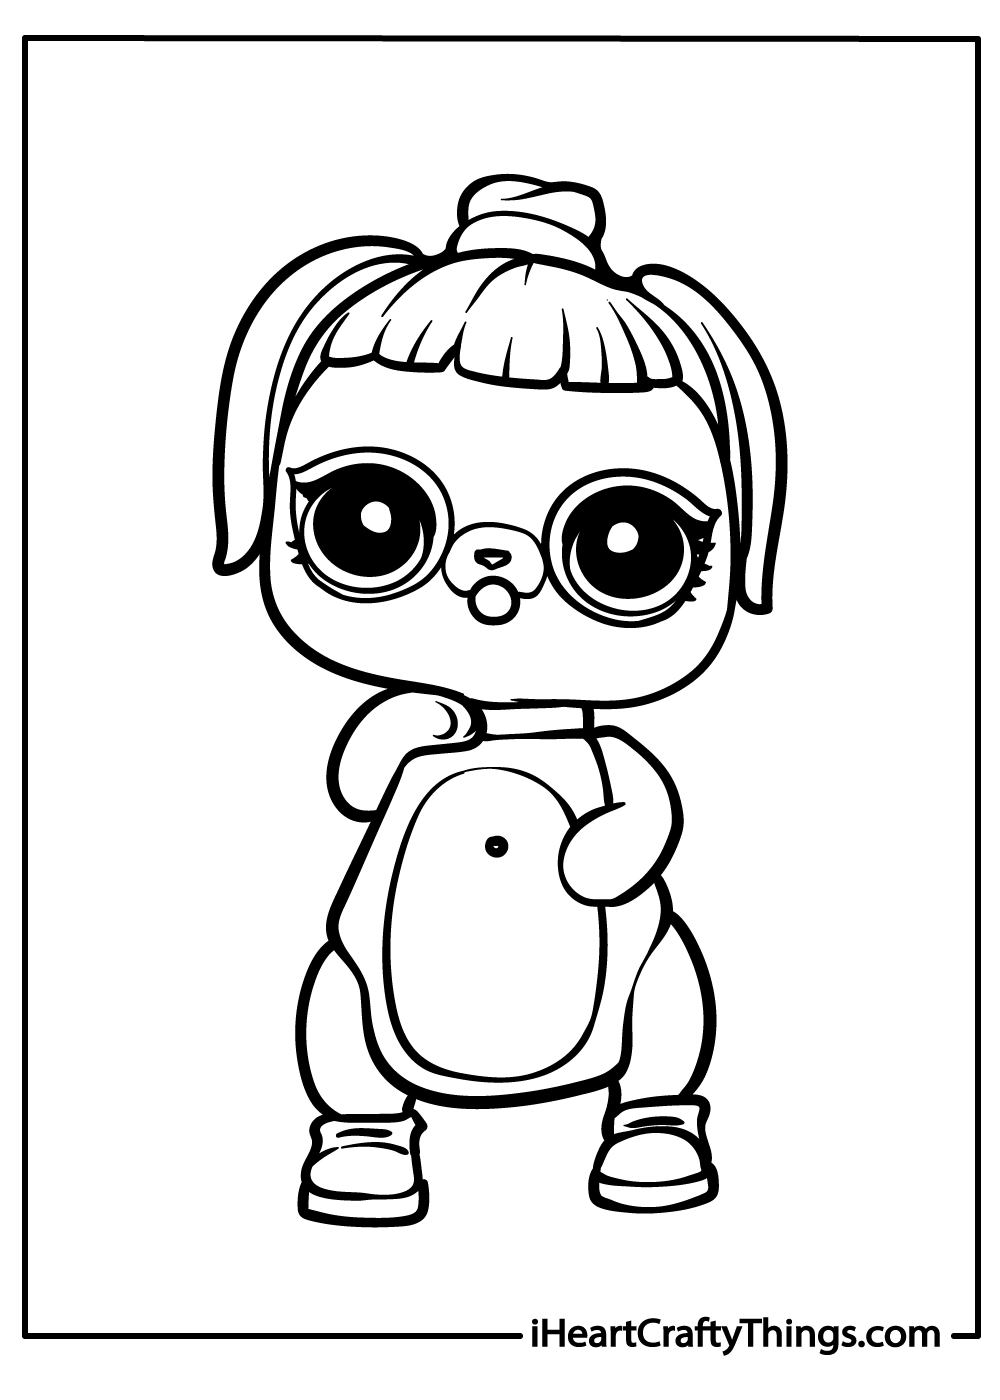 LOL Pets Coloring pages – Coloring sheets with LOL Surprise